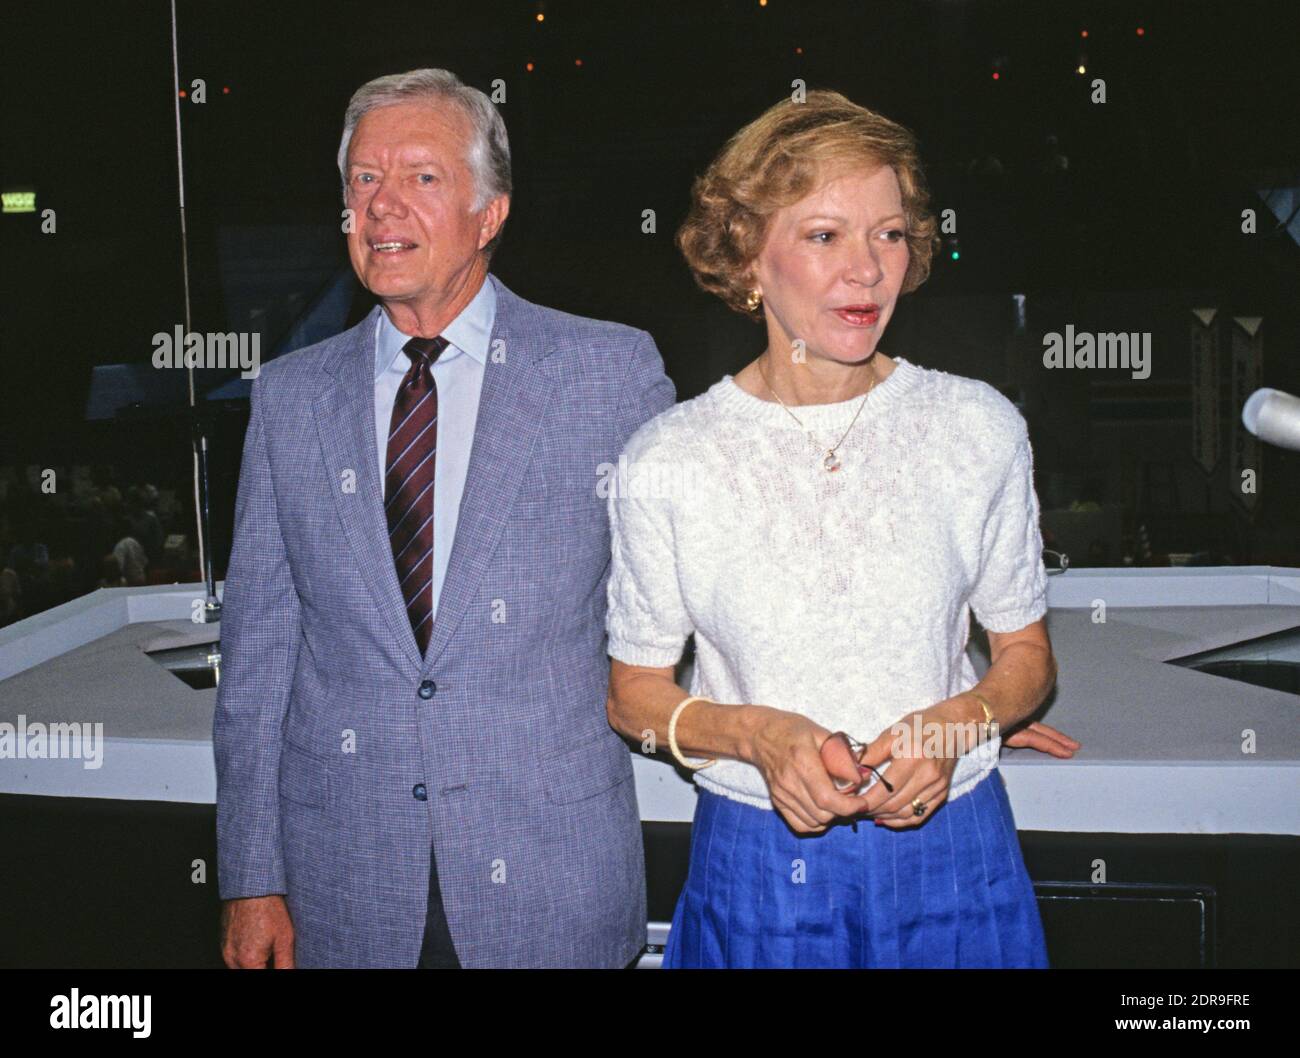 Former United States President Jimmy Carter, accompanied by his wife, former first lady Rosalynn Carter, visits the Omni Coliseum in Atlanta, Georgia prior to his addressing the 1988 Democratic National Convention on July 18, 1988. Photo by Arnie Sachs/CNP/ABACAPRESS.COM Stock Photo